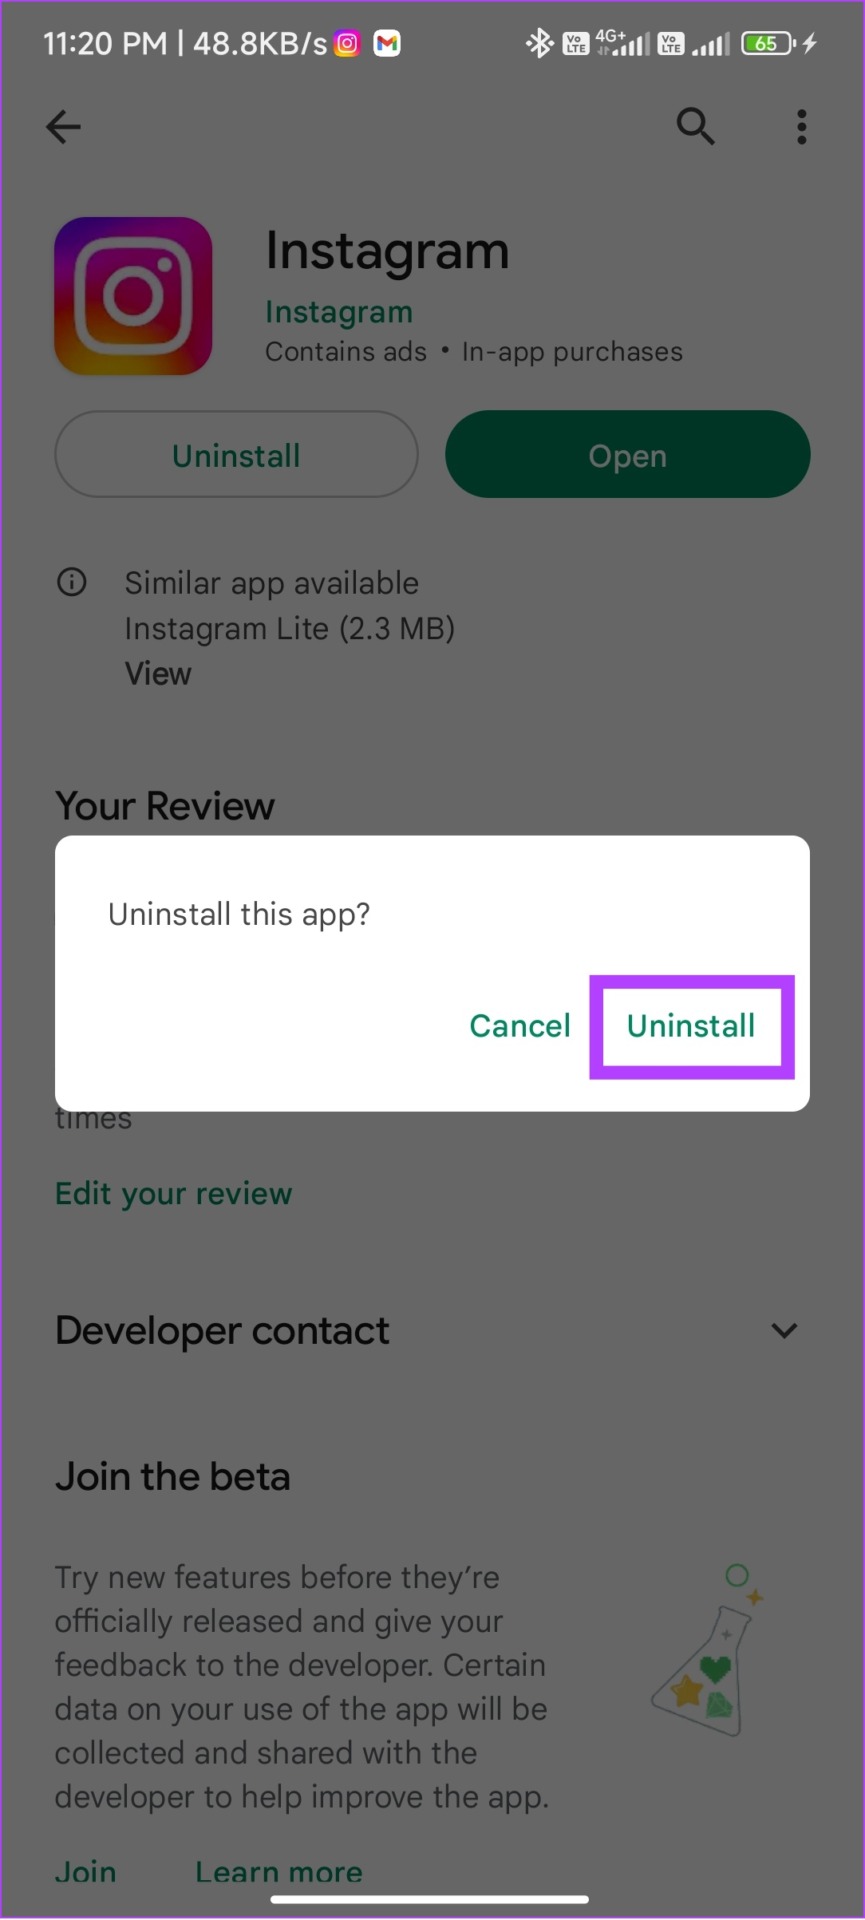 Tap uninstall to confrim Instagram deletion from Android